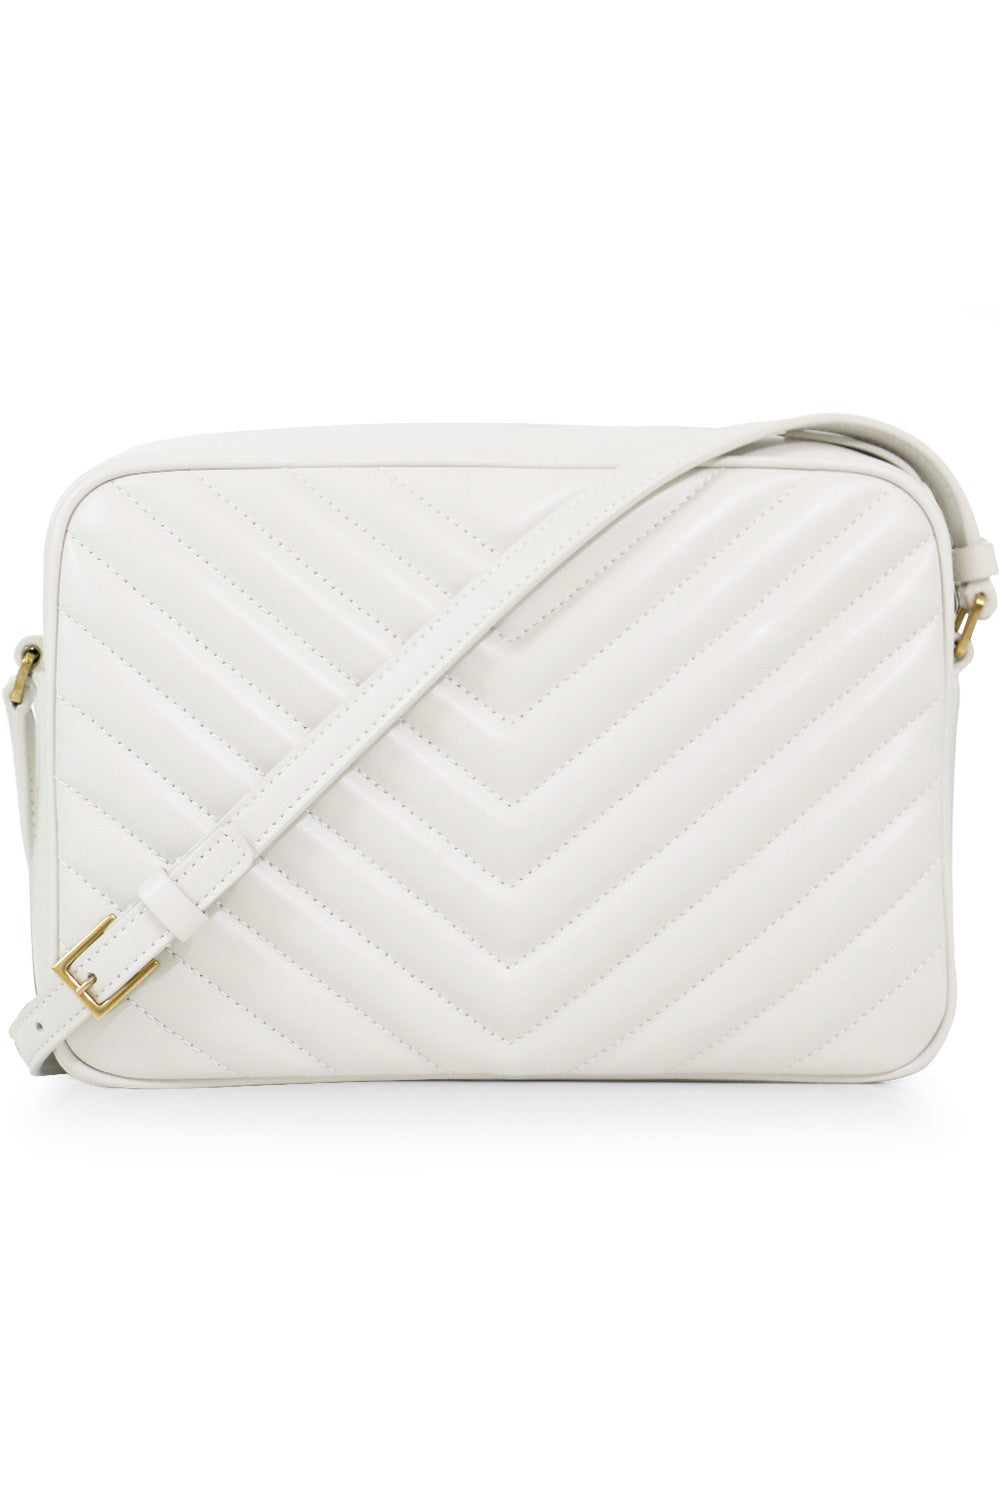 SAINT LAURENT BAGS WHITE LOU QUILTED CAMERA BAG | CREMA SOFT/GOLD